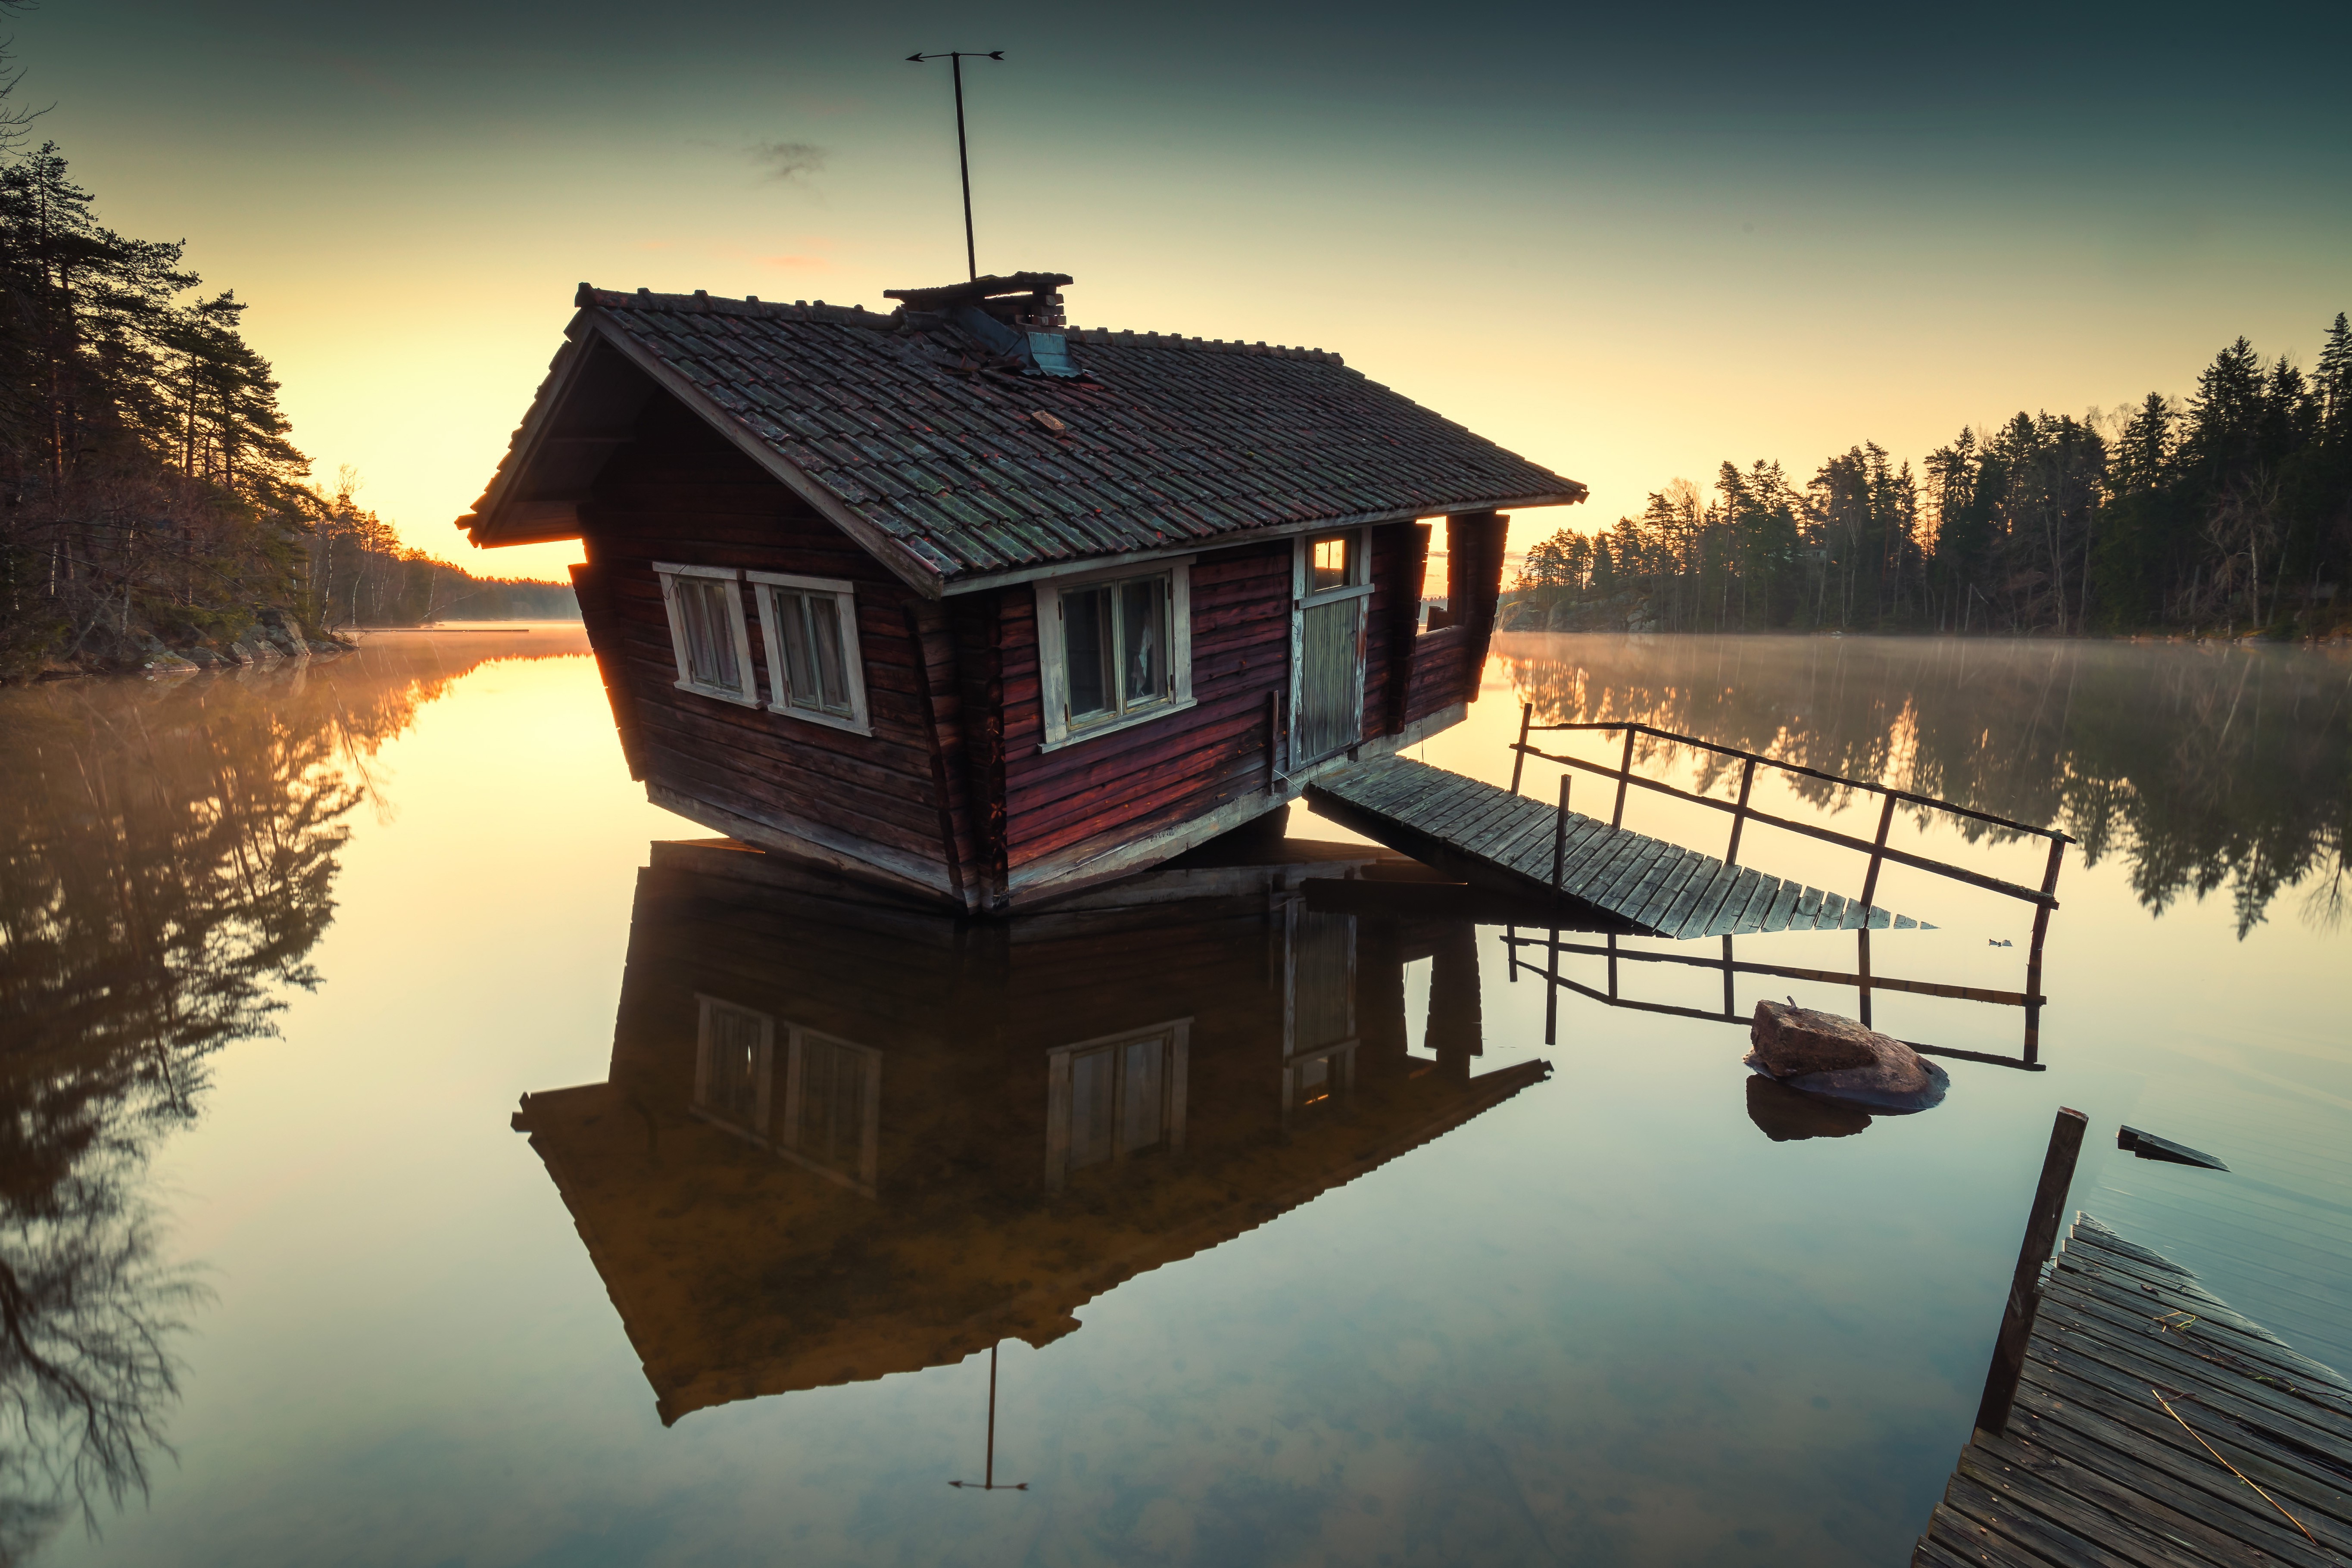 Water House Images Hd - HD Wallpaper 